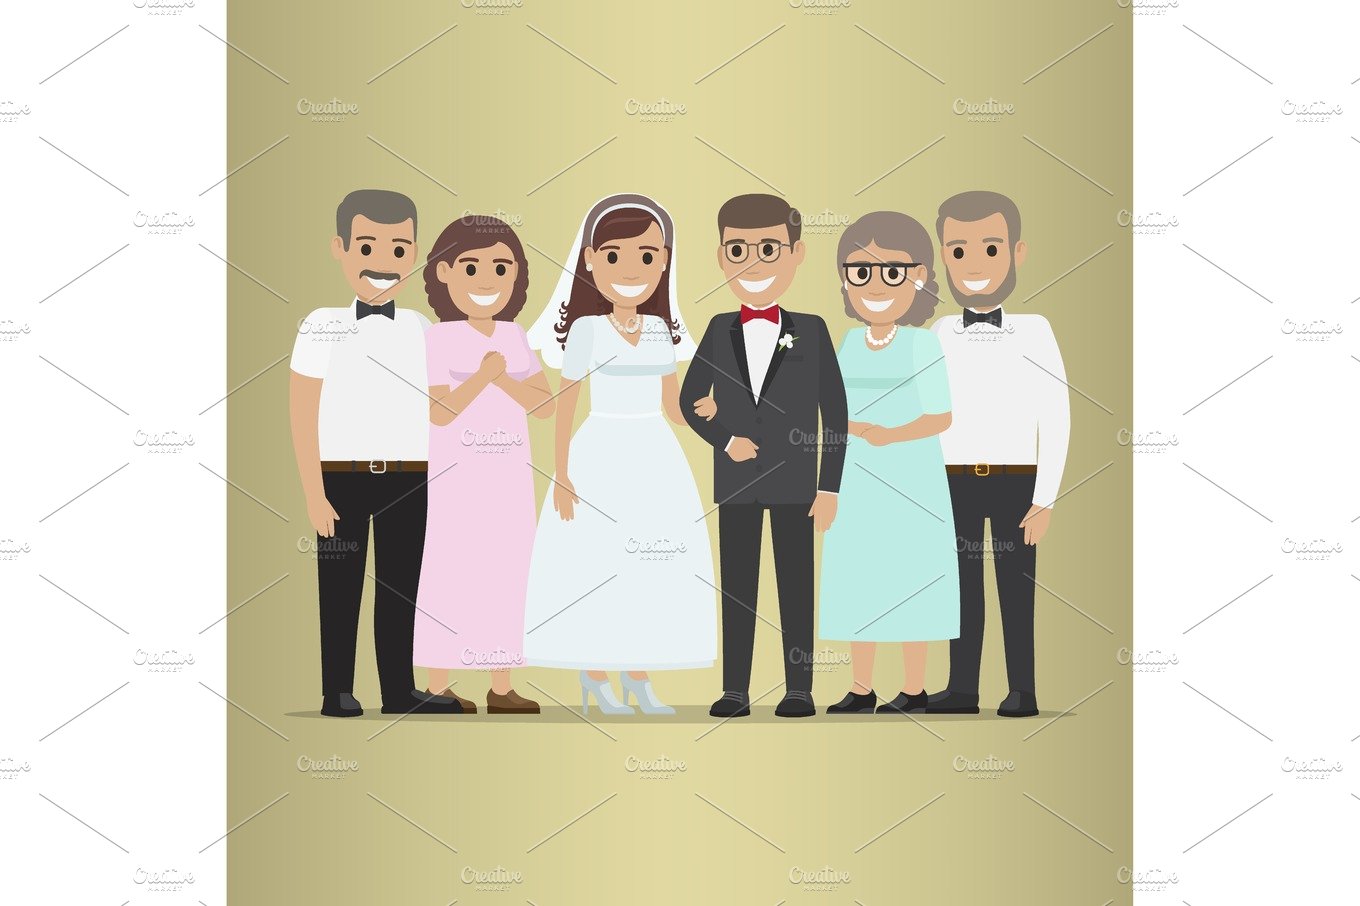 Newly Married Couple With Parents-In-Law Vector cover image.